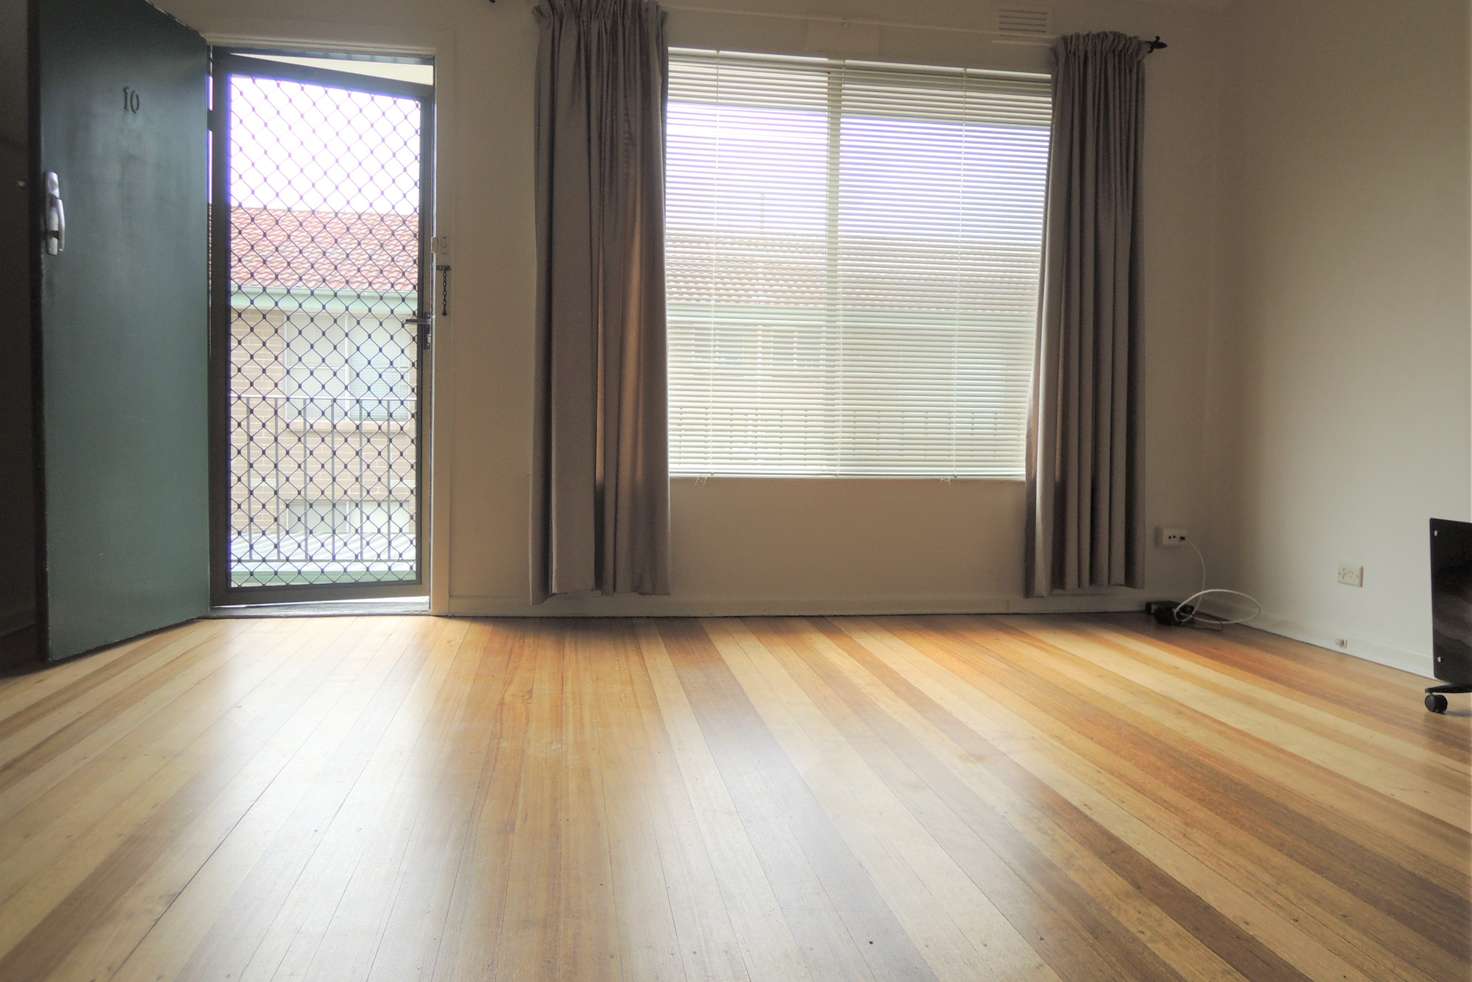 Main view of Homely apartment listing, 10/11 Toward Street, Murrumbeena VIC 3163